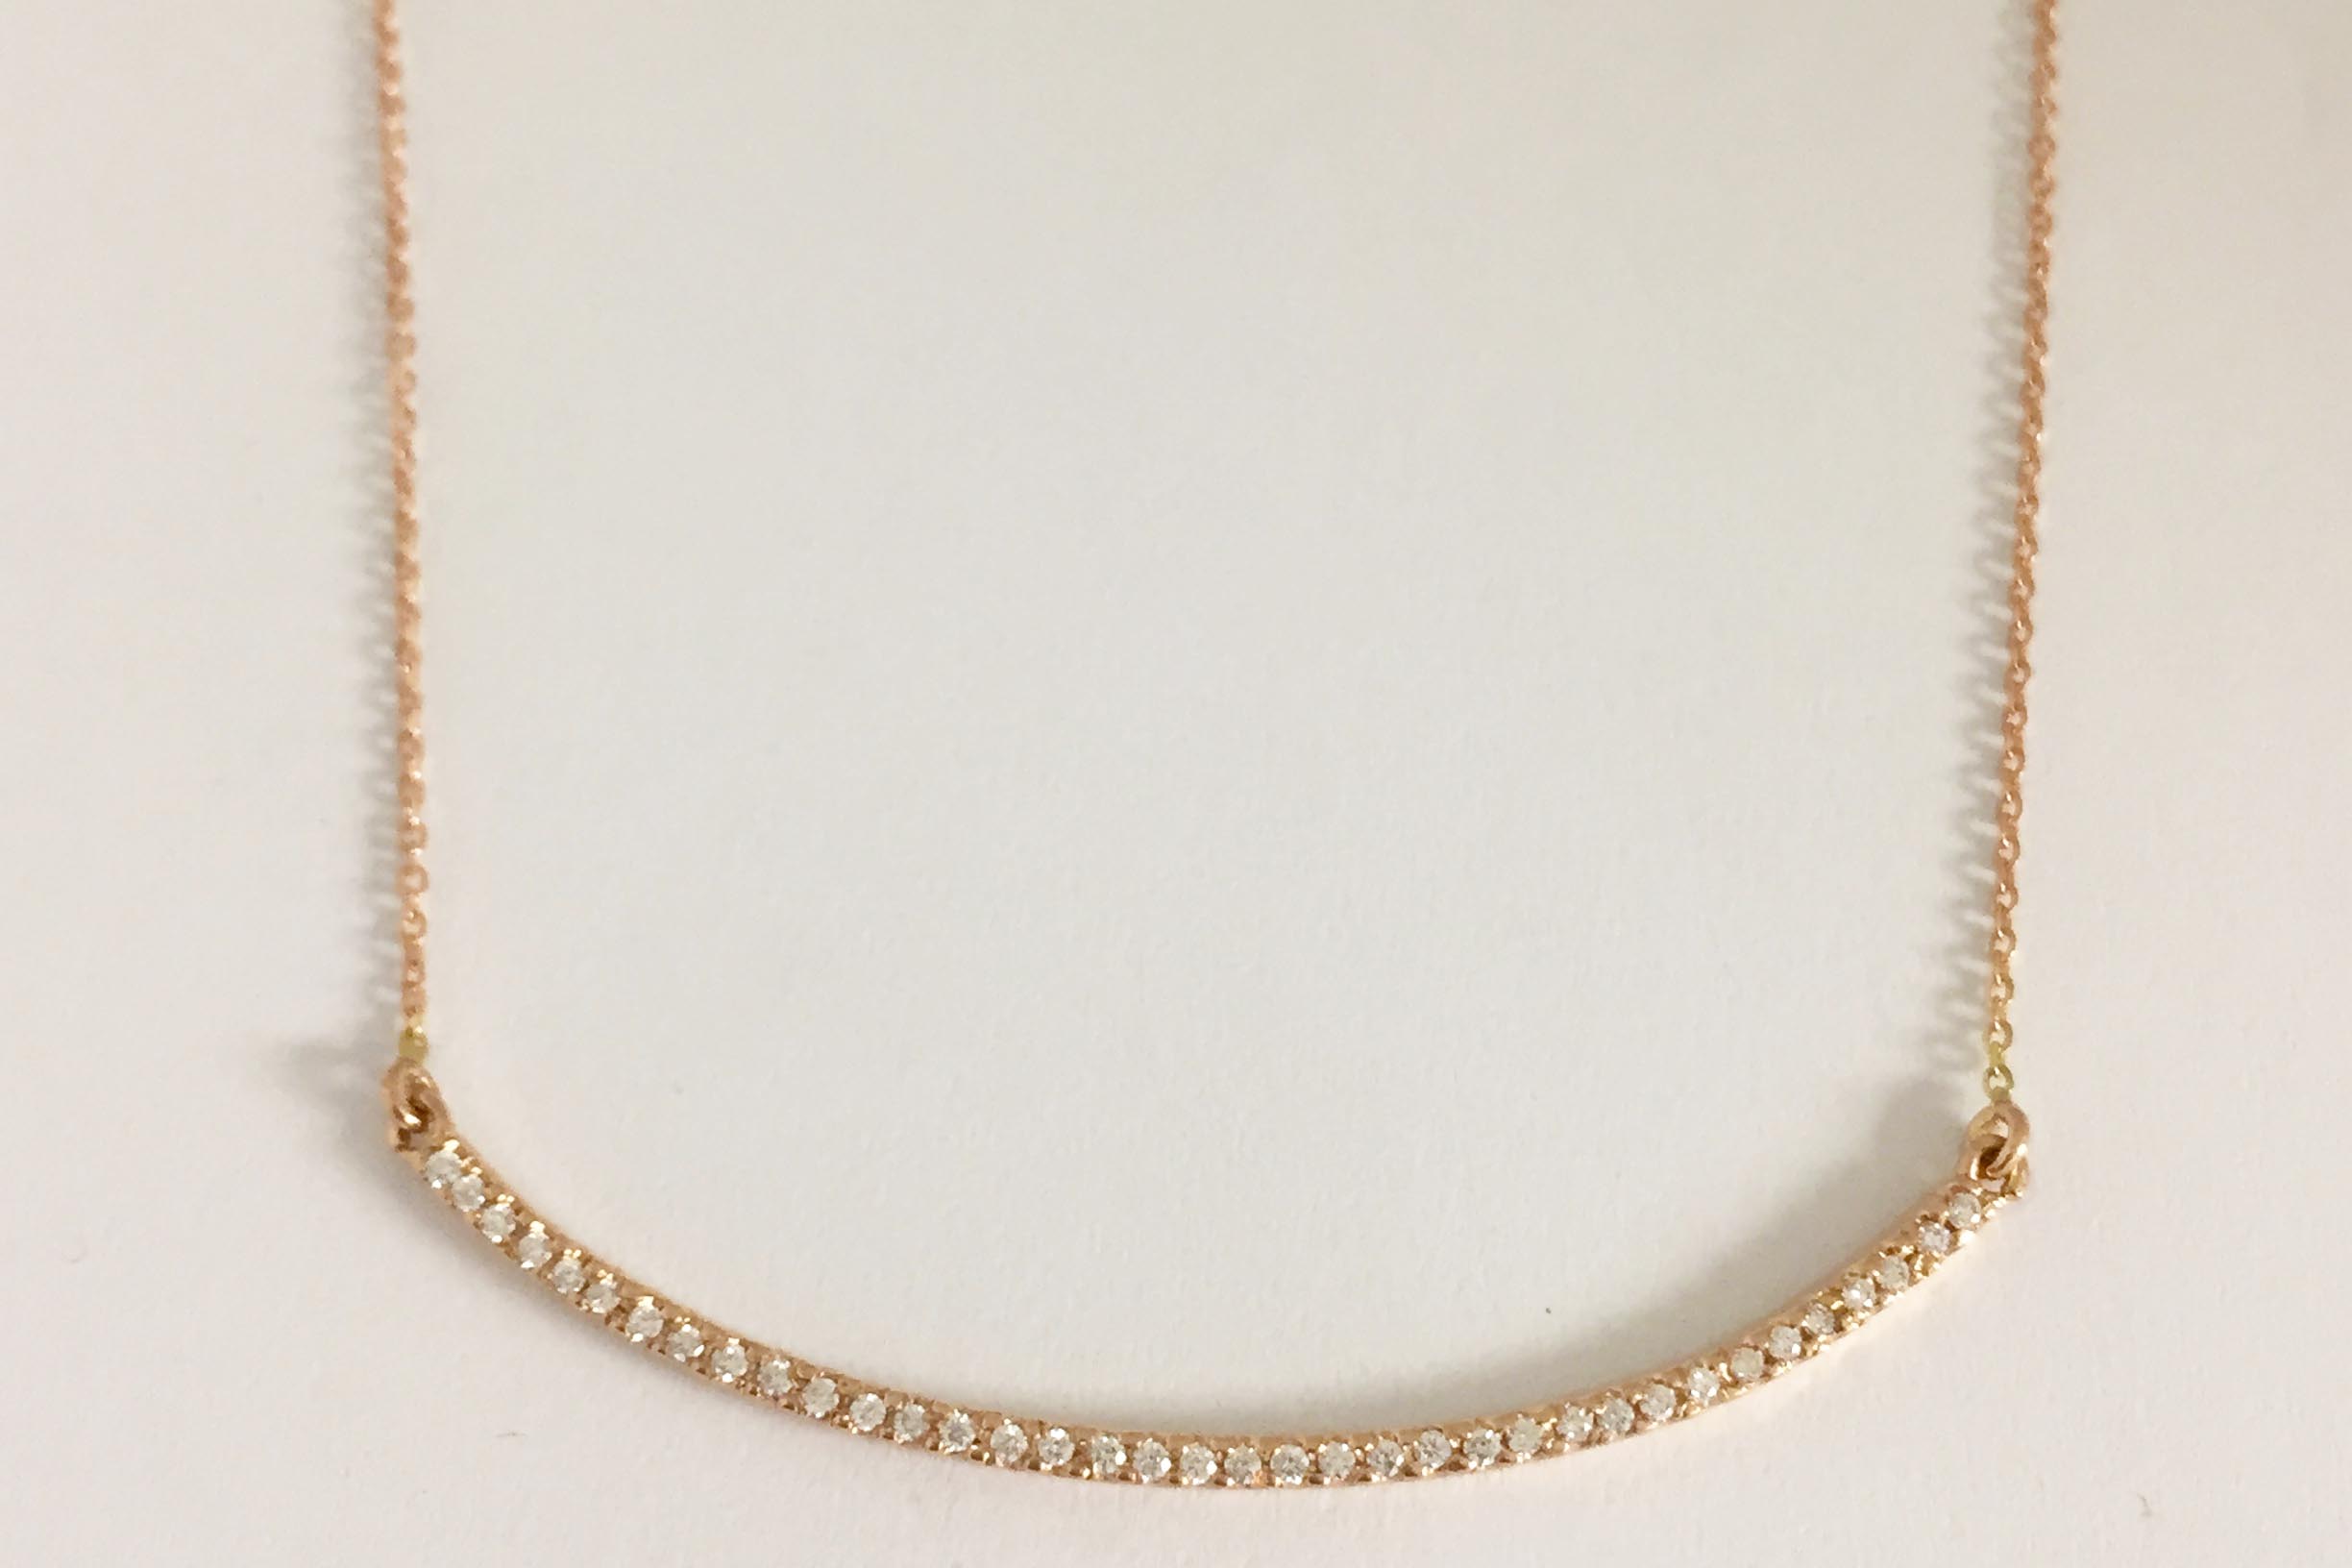 Smile necklace in rose gold and diamonds